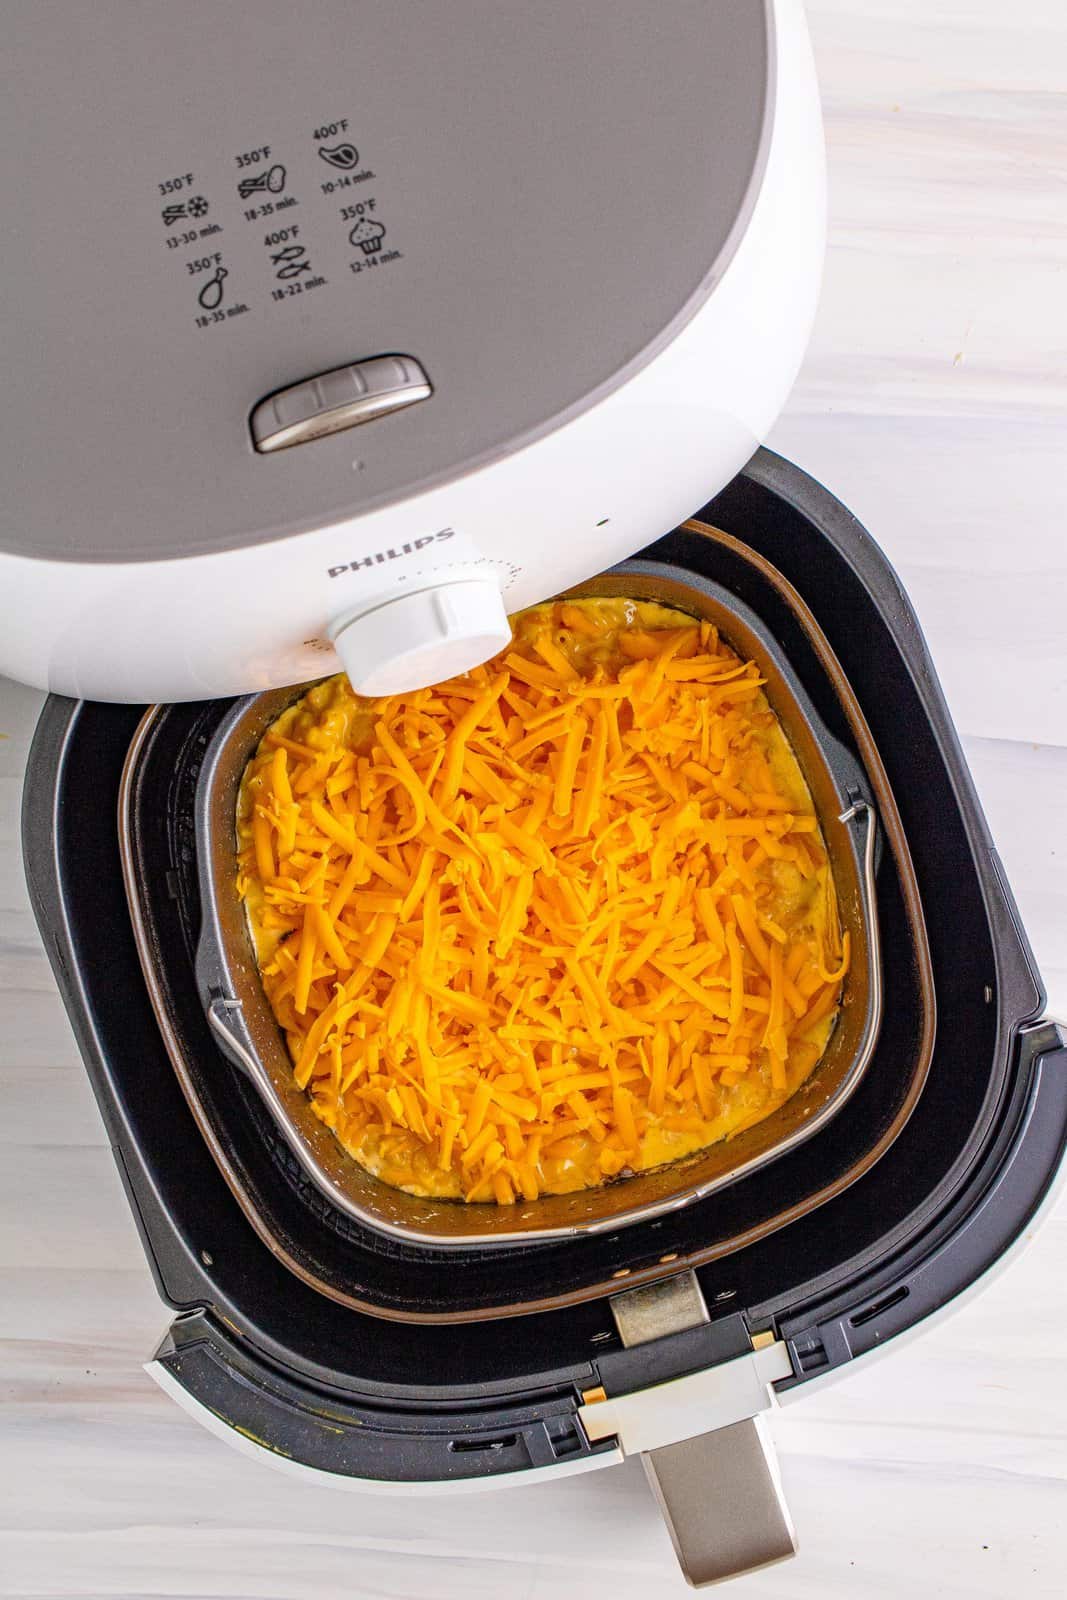 Cheese added to top of Mac and cheese mixture in air fryer.